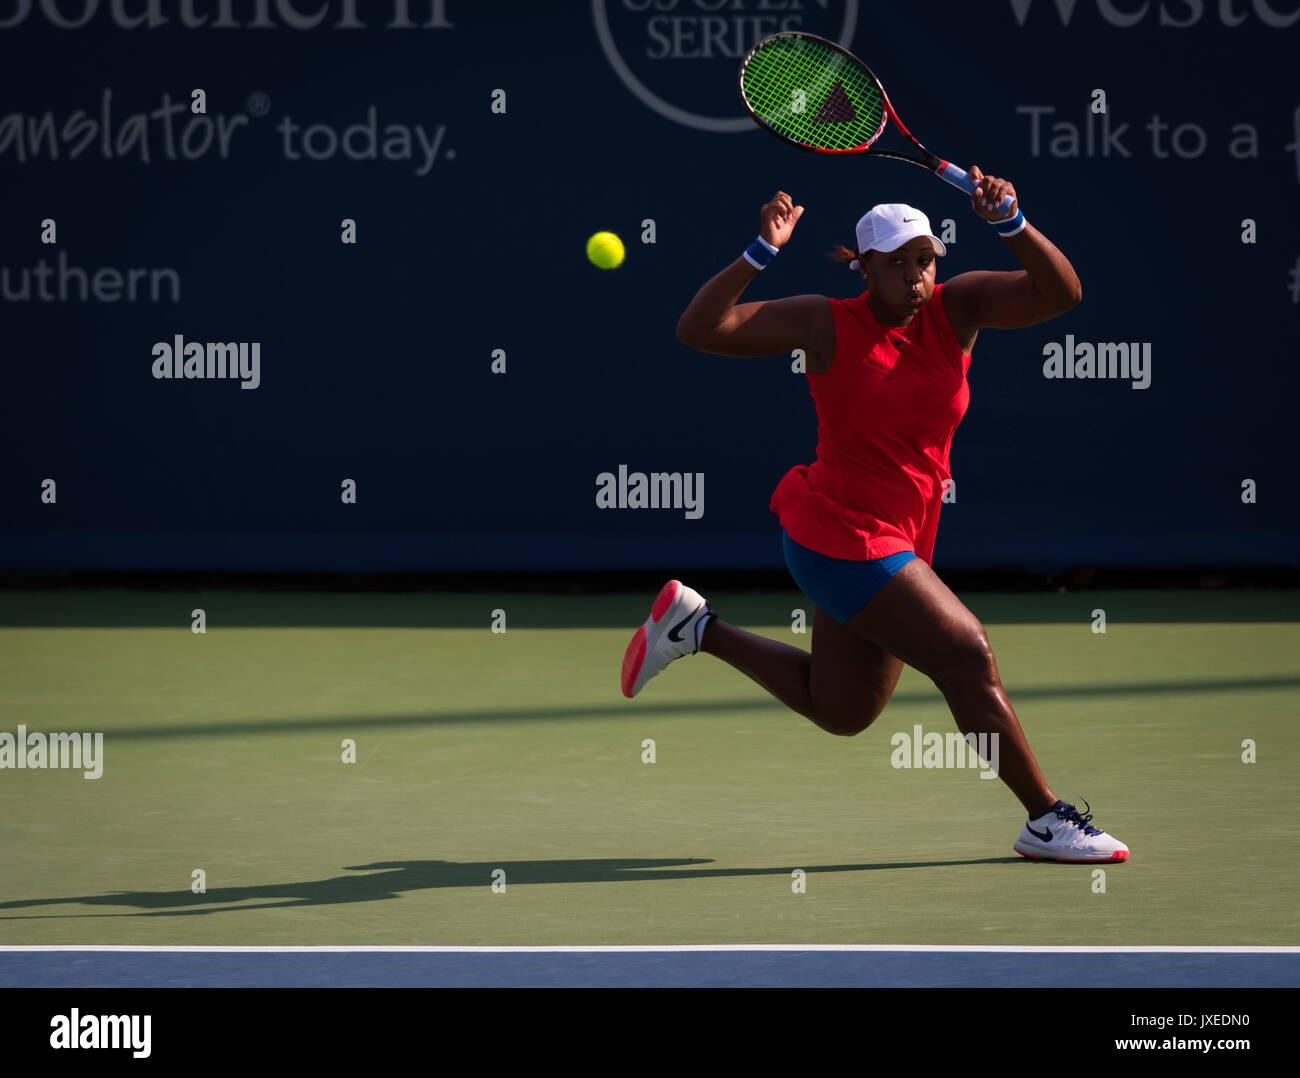 Cincinnati, United States. 15 August, 2017. Taylor Townsend of the United  States at the 2017 Western & Southern Open WTA Premier 5 tennis tournament  Credit: Jimmie48 Photography/Alamy Live News Stock Photo - Alamy